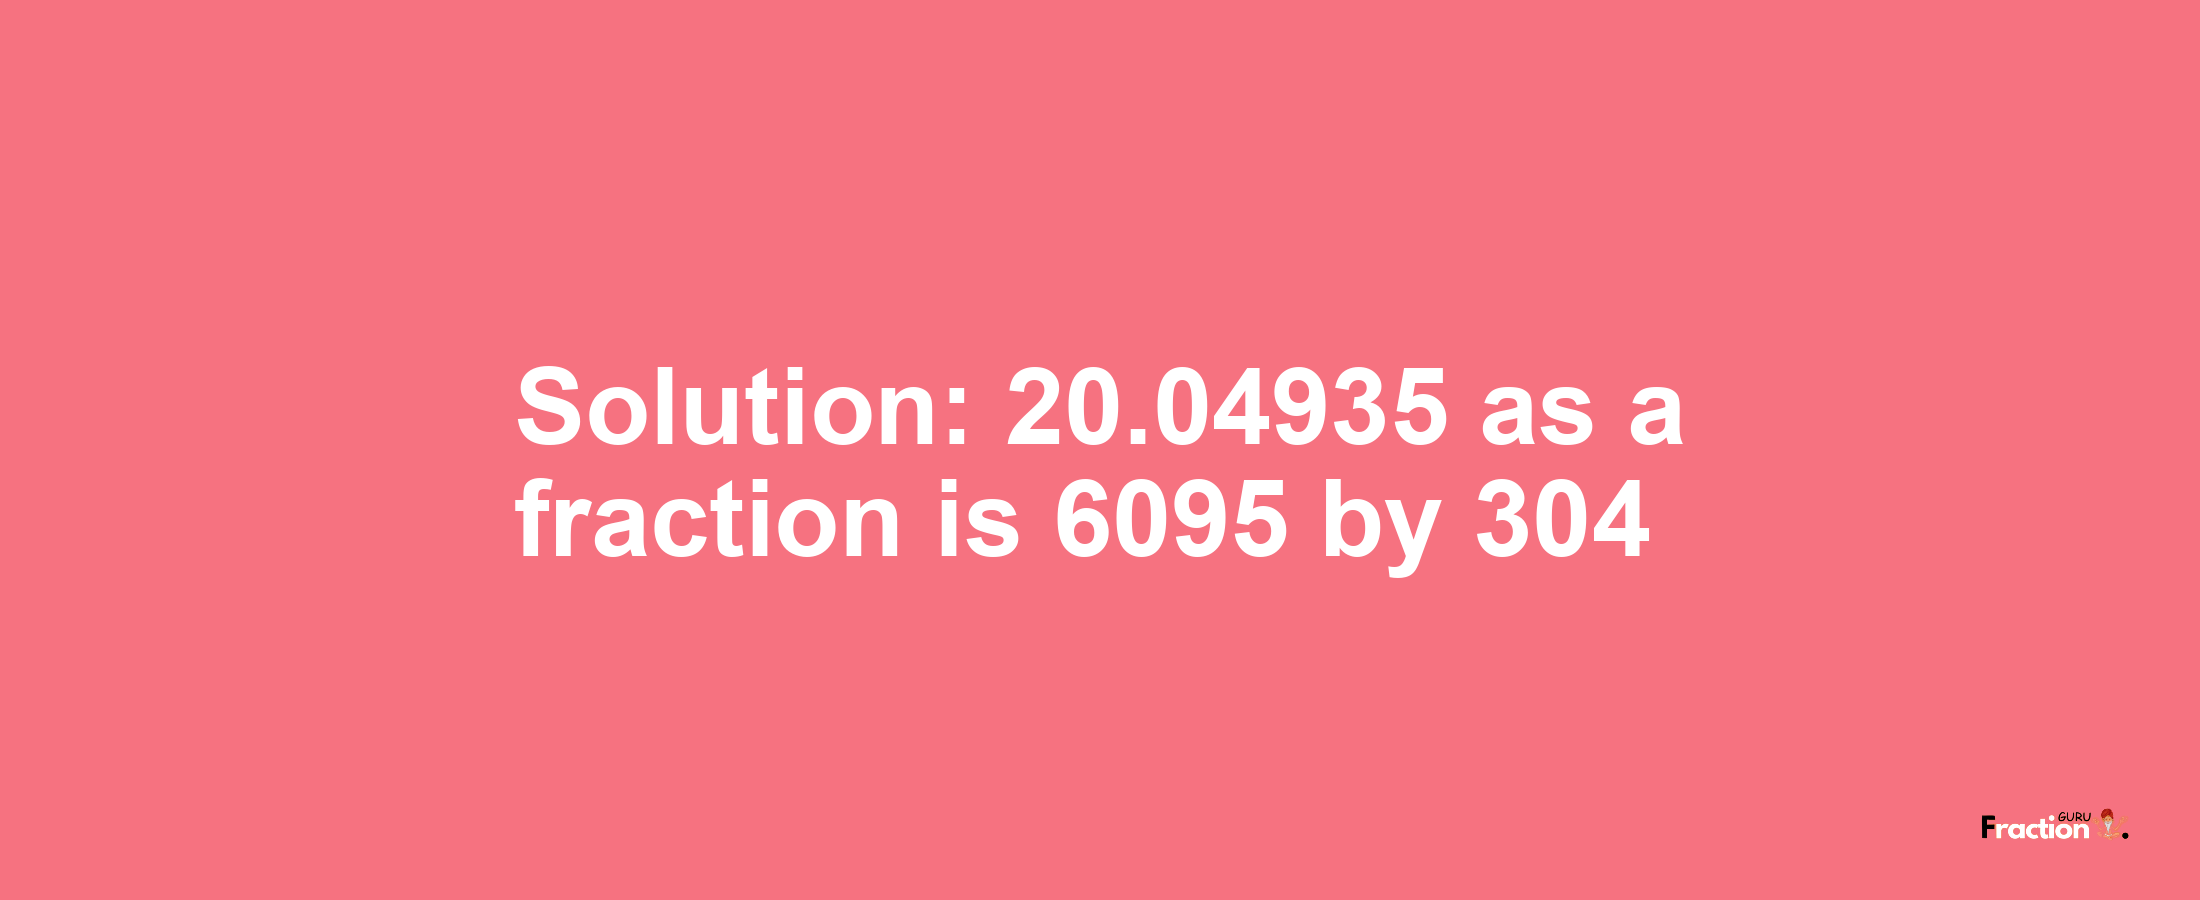 Solution:20.04935 as a fraction is 6095/304